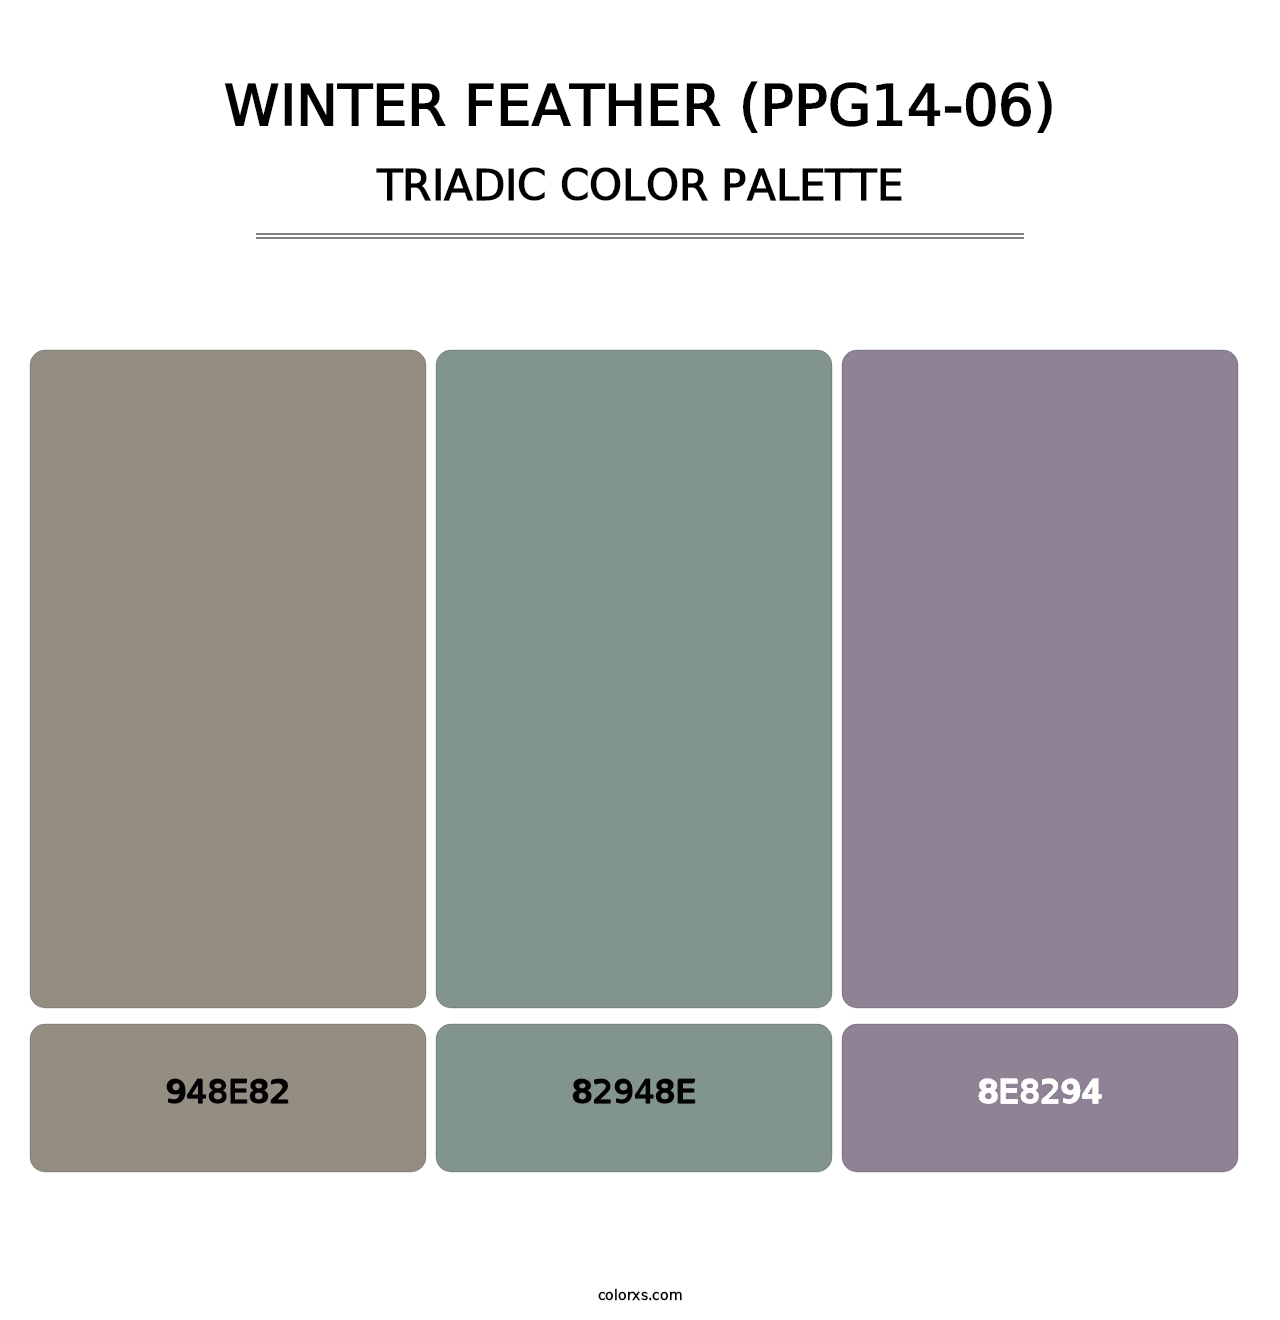 Winter Feather (PPG14-06) - Triadic Color Palette